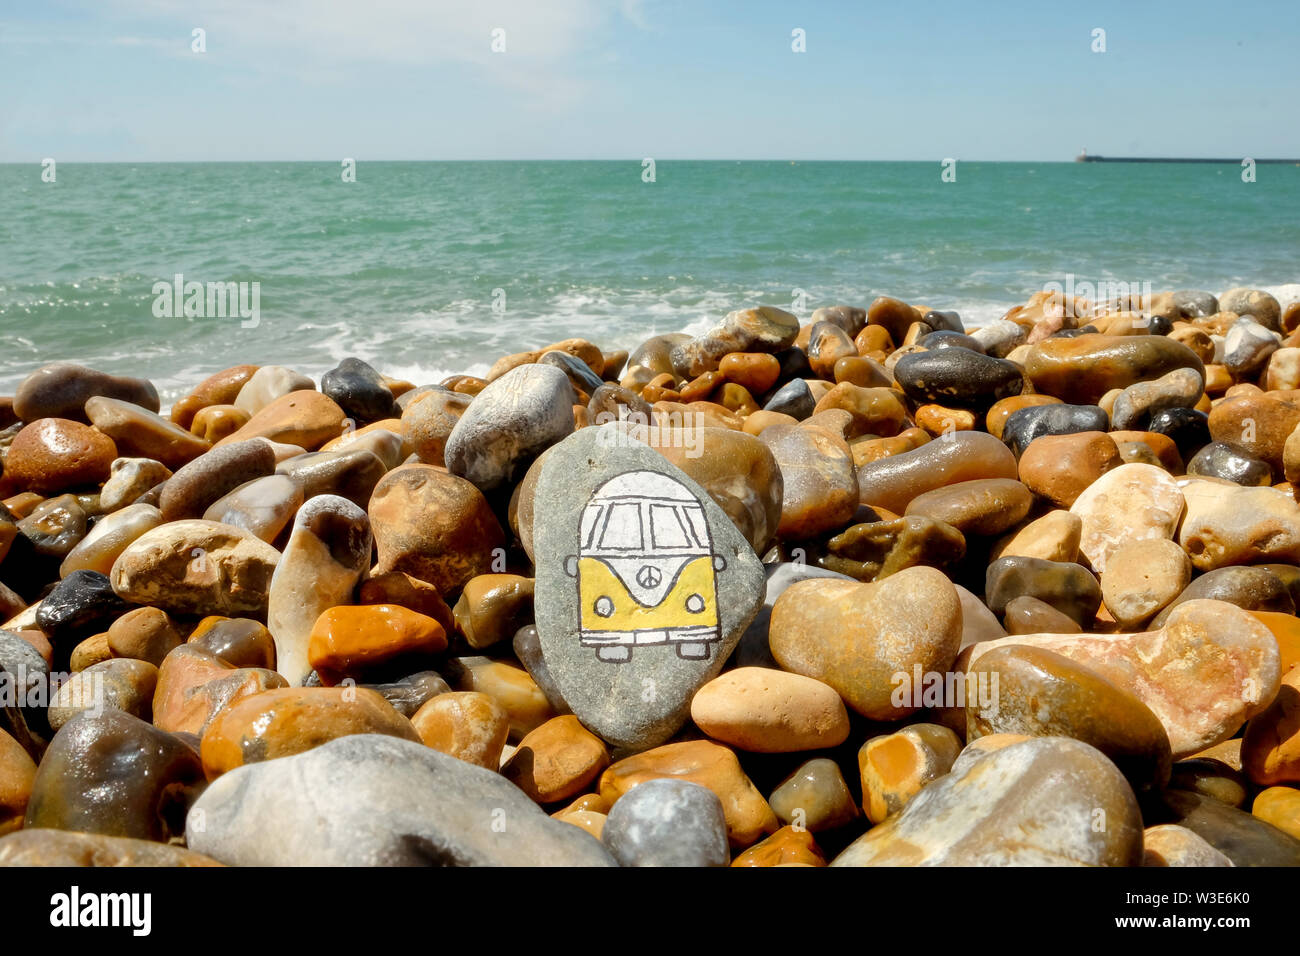 A yellow and white camper van painted onto a pebble on a pebble, beyond the pebbles is the blue sea and blue sky Stock Photo